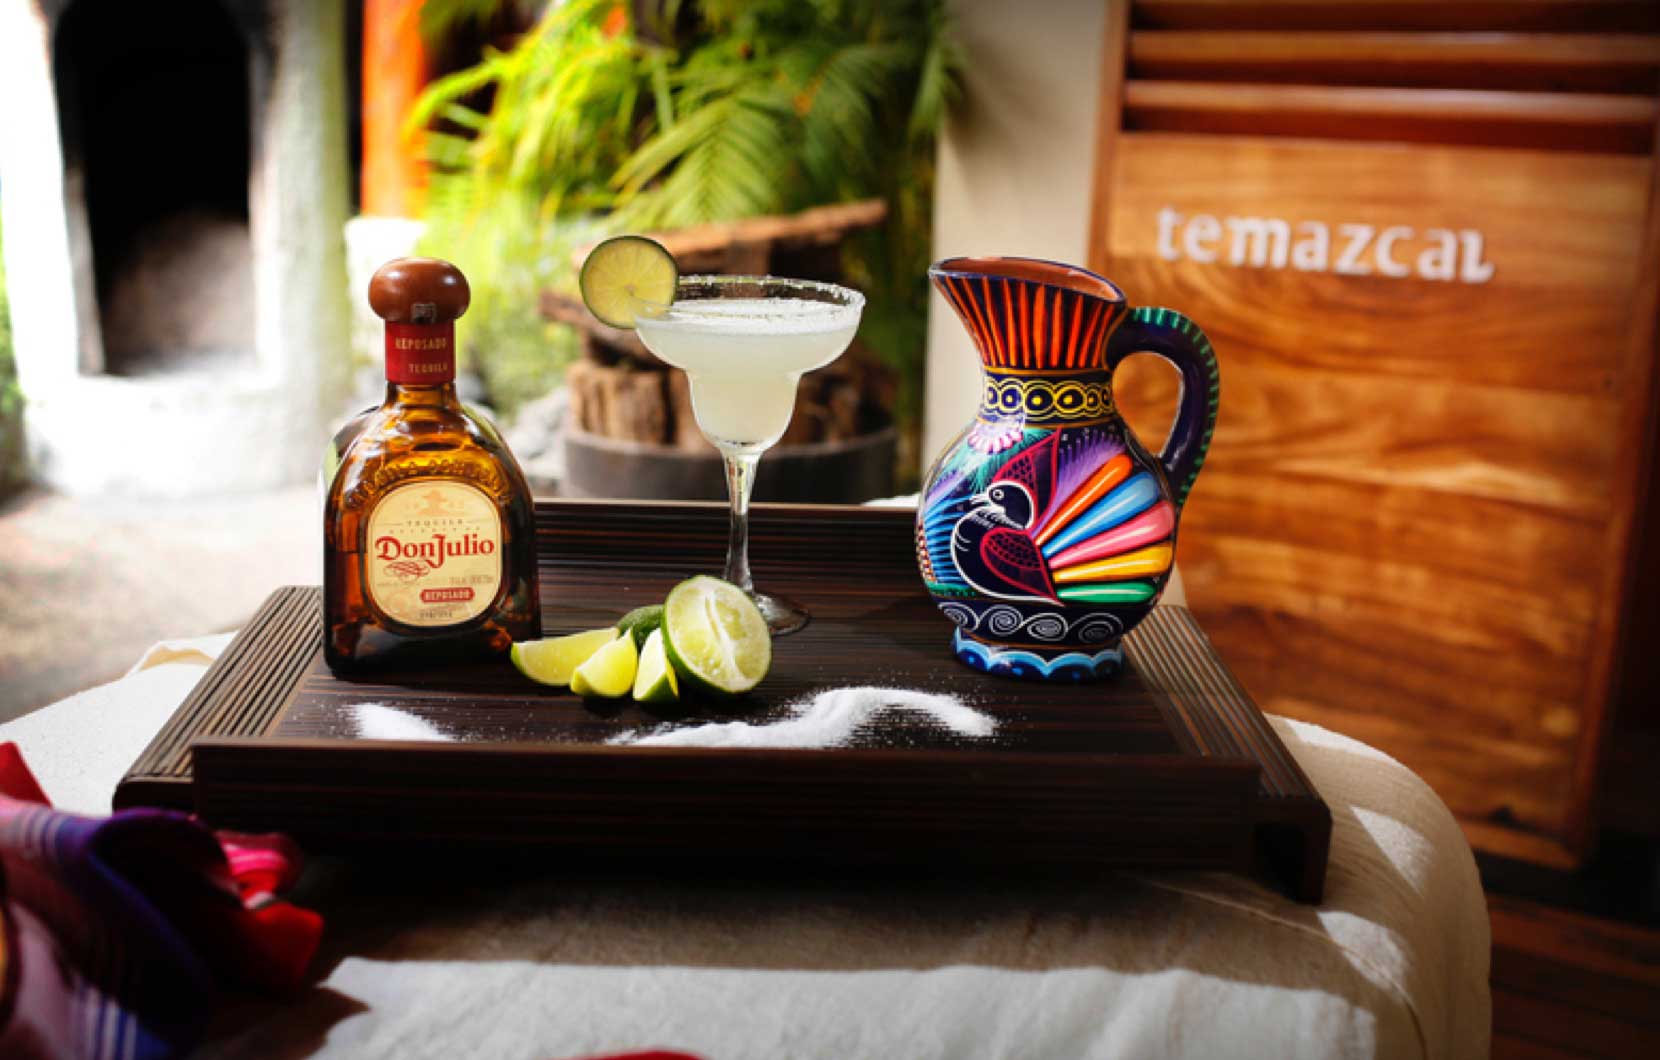 Your treatment ends with a refreshing margarita. Salud!